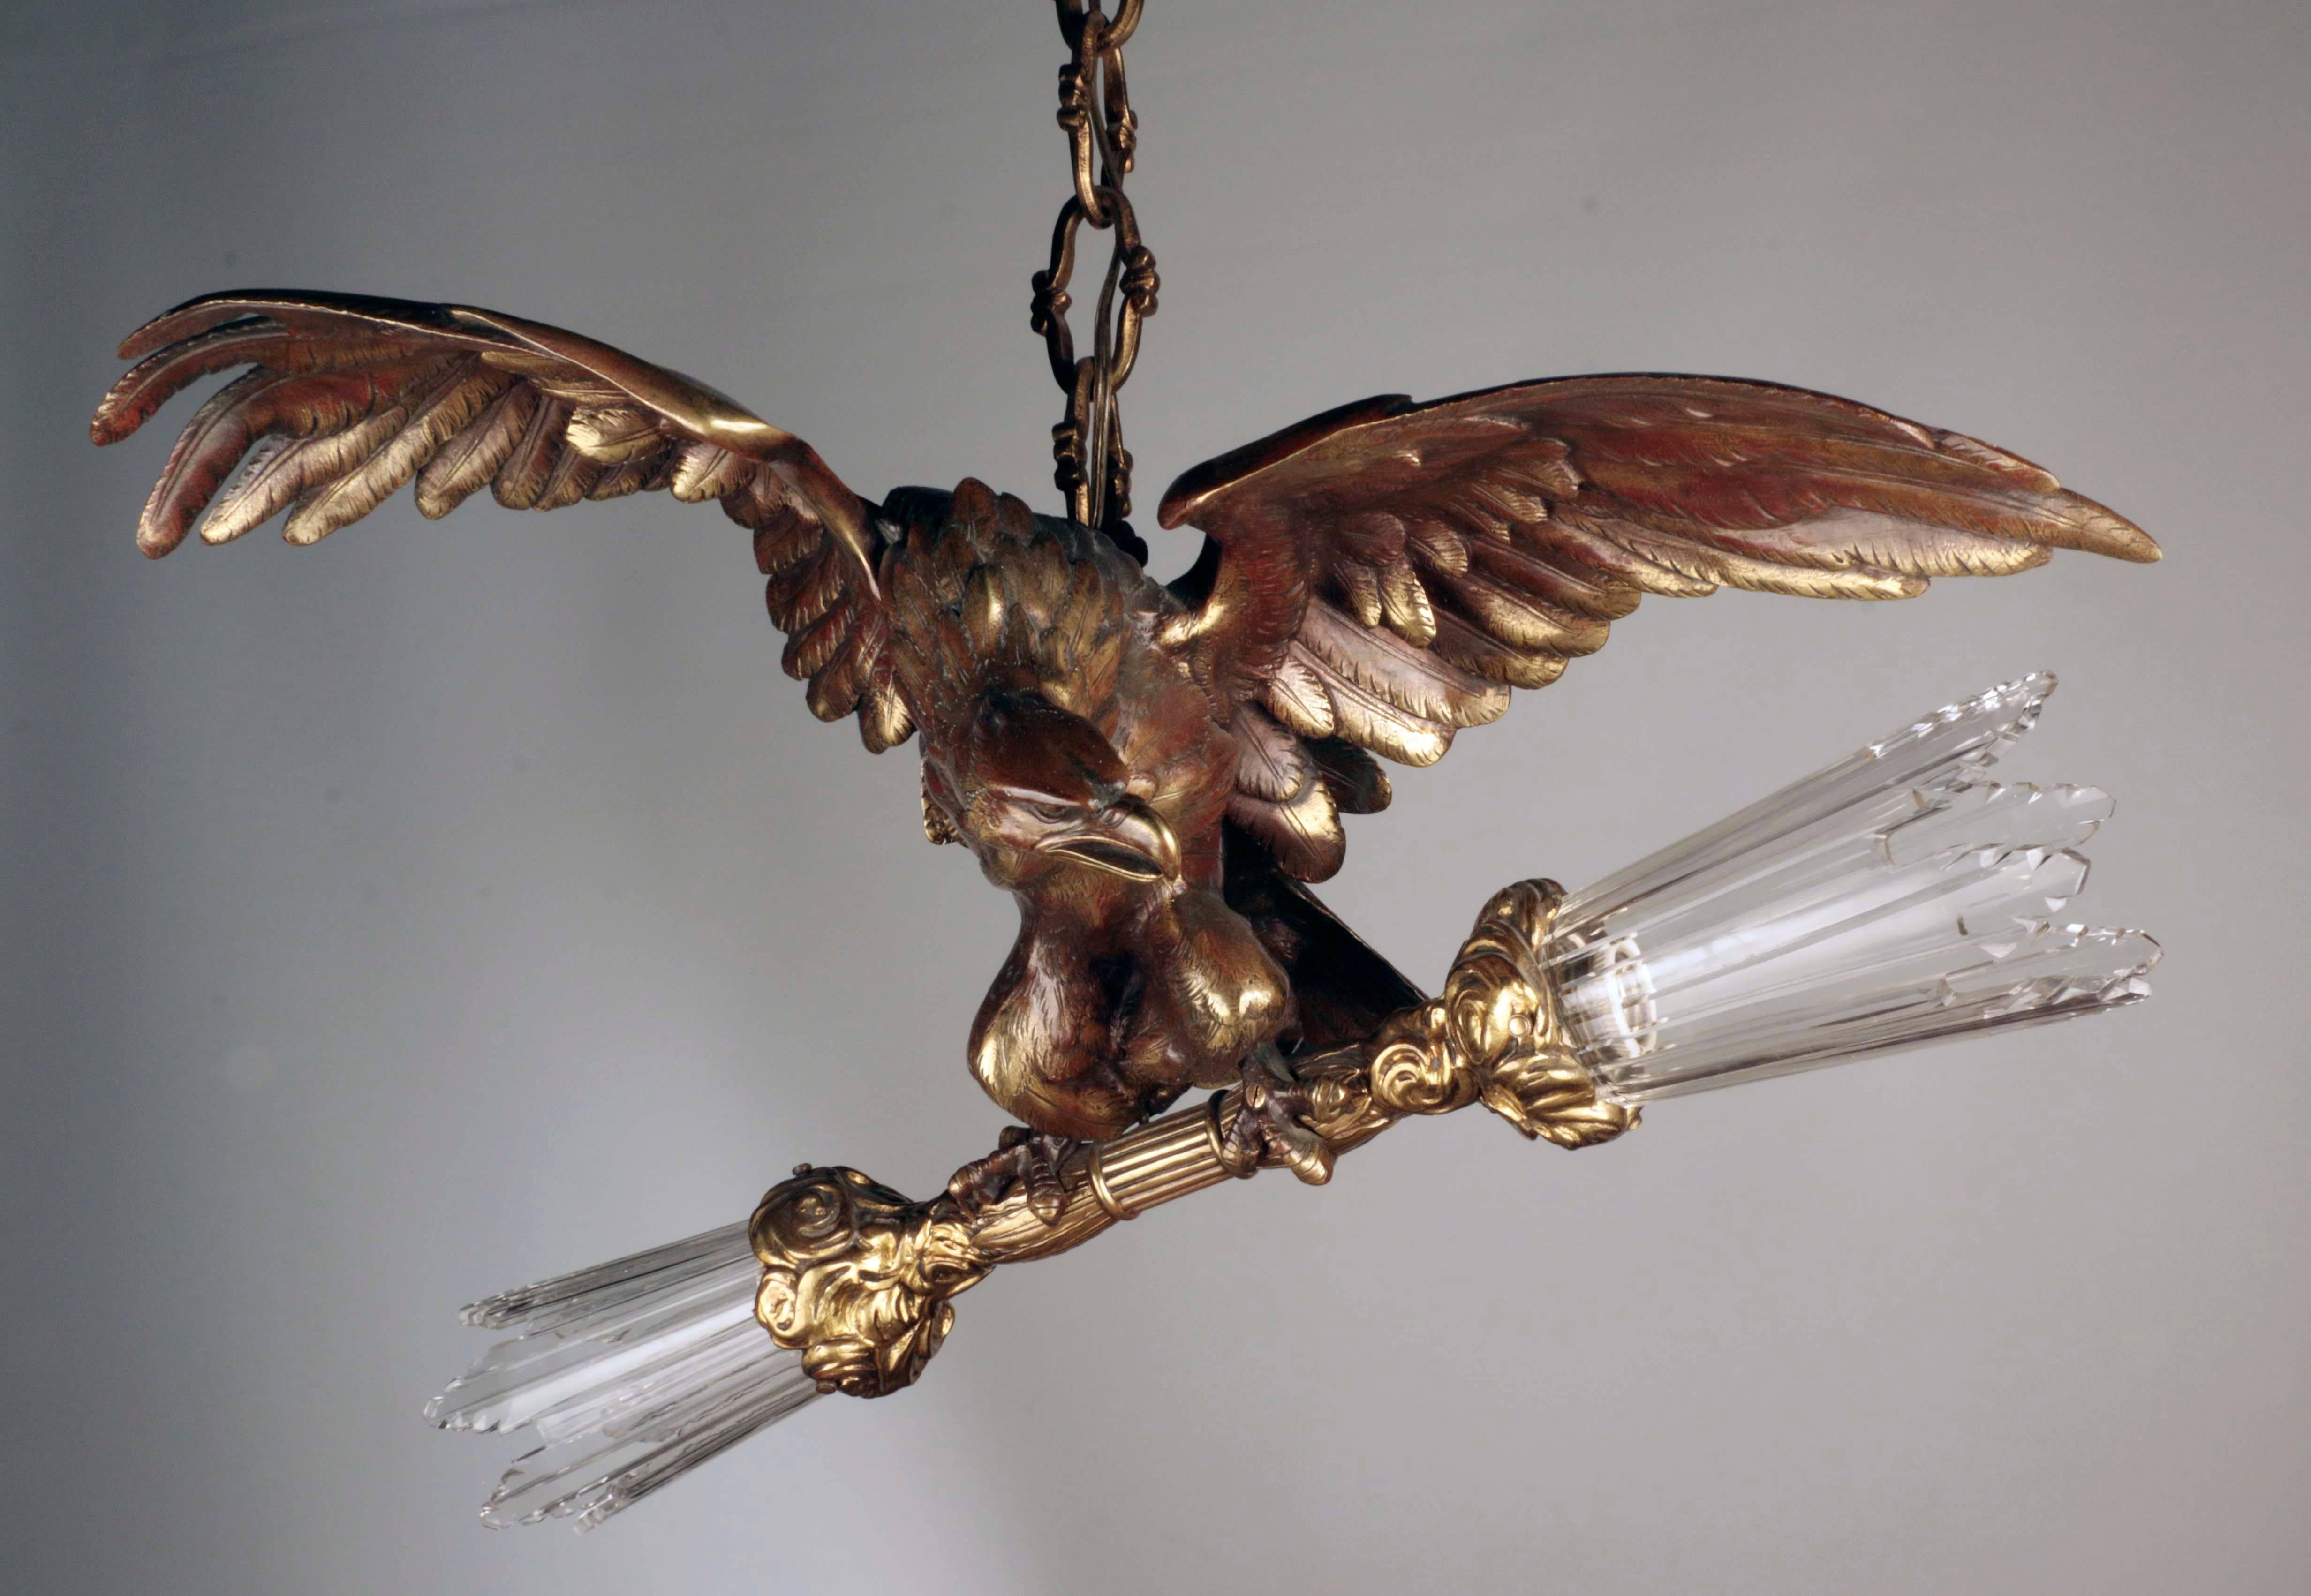 Bronze eagle with outstretched wings suspended from chain and holding sheafs of glass wheat bound with bouquets of roses in its claws; the sheafs forming shades for inserted lights.